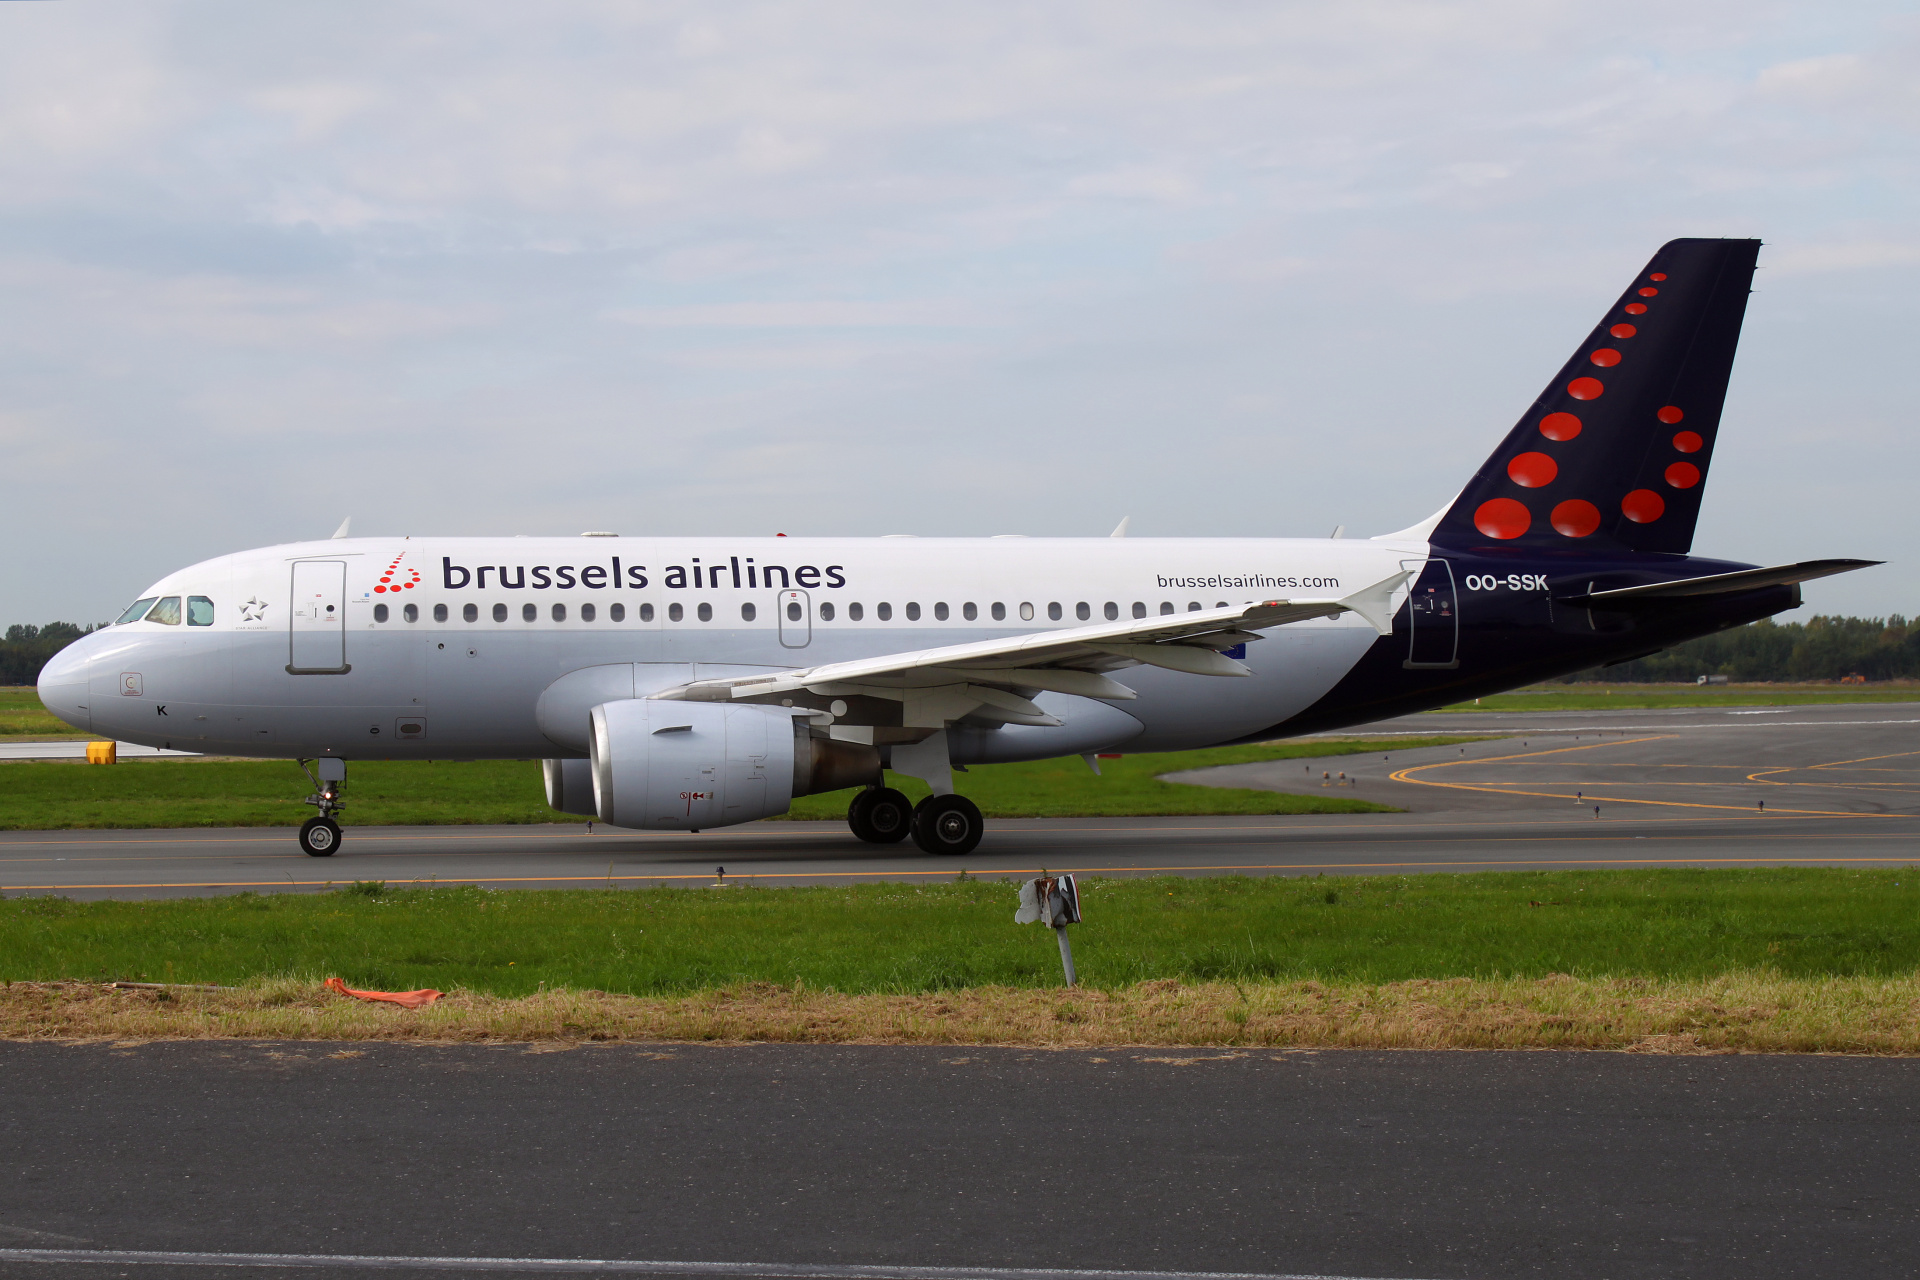 OO-SSK (Aircraft » EPWA Spotting » Airbus A319-100 » Brussels Airlines)